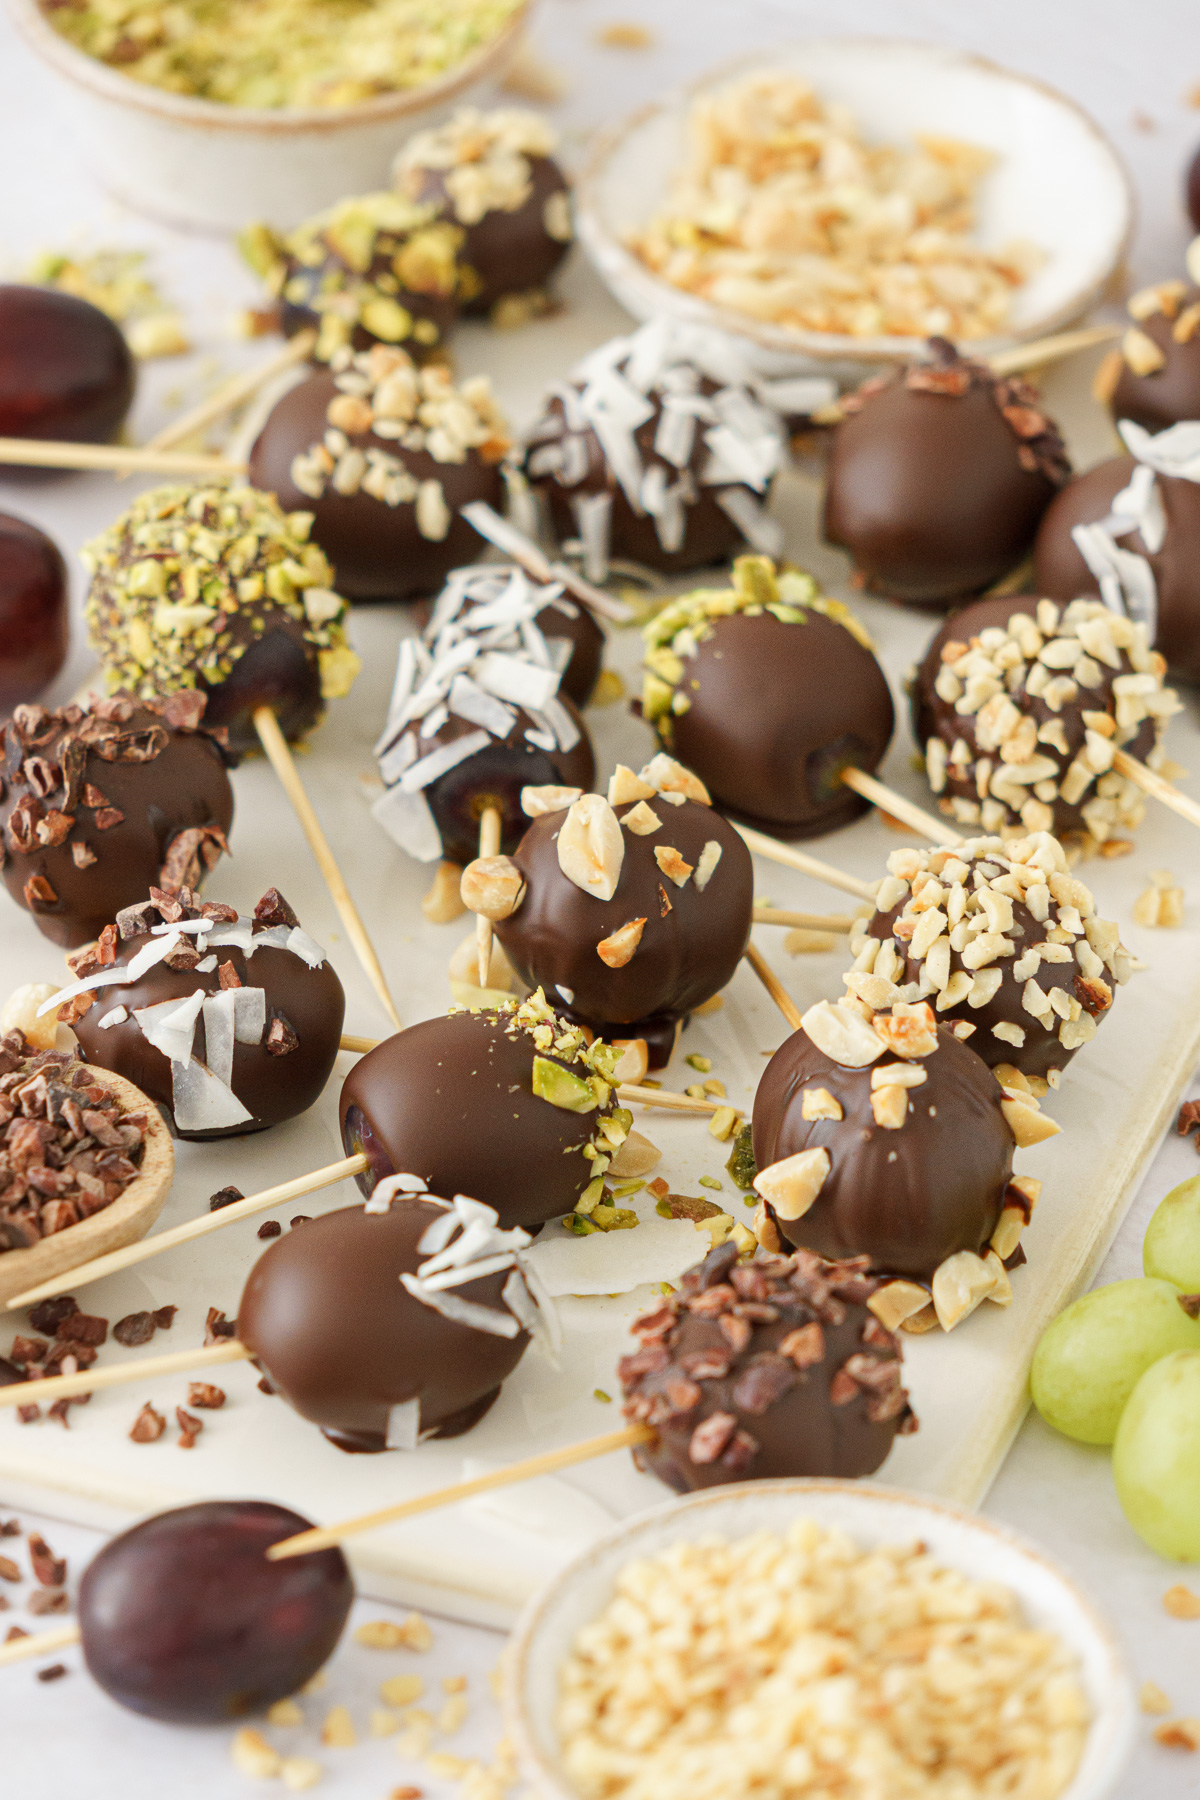 Close up of chocolate covered grapes on a ceramic board.